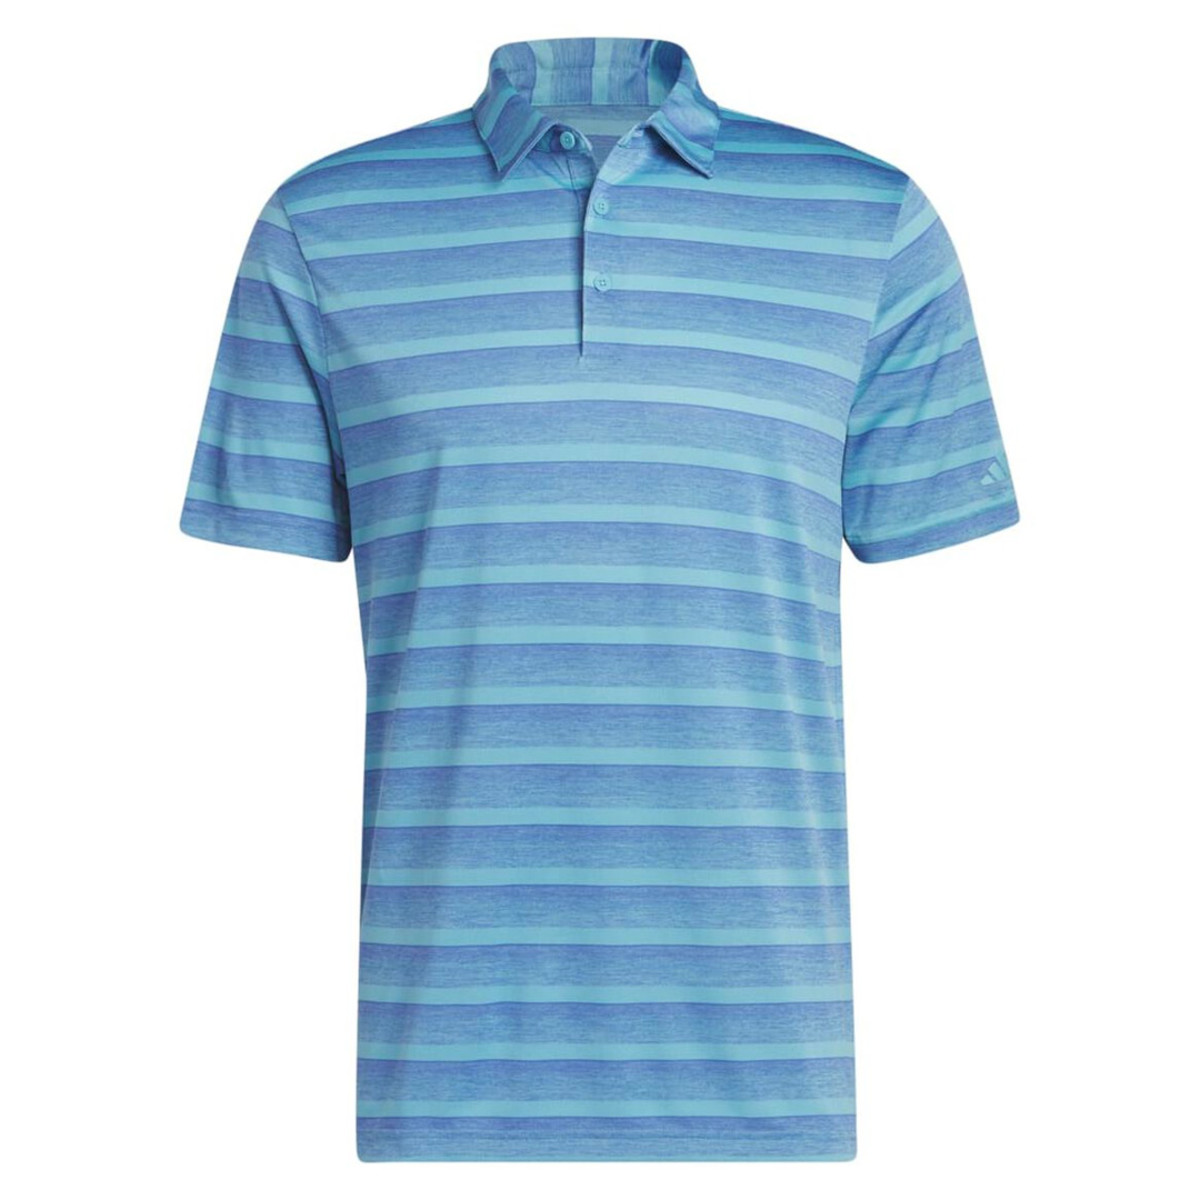 the adidas two color striped polo, seen here in blue, is on sale at pga tour superstore.